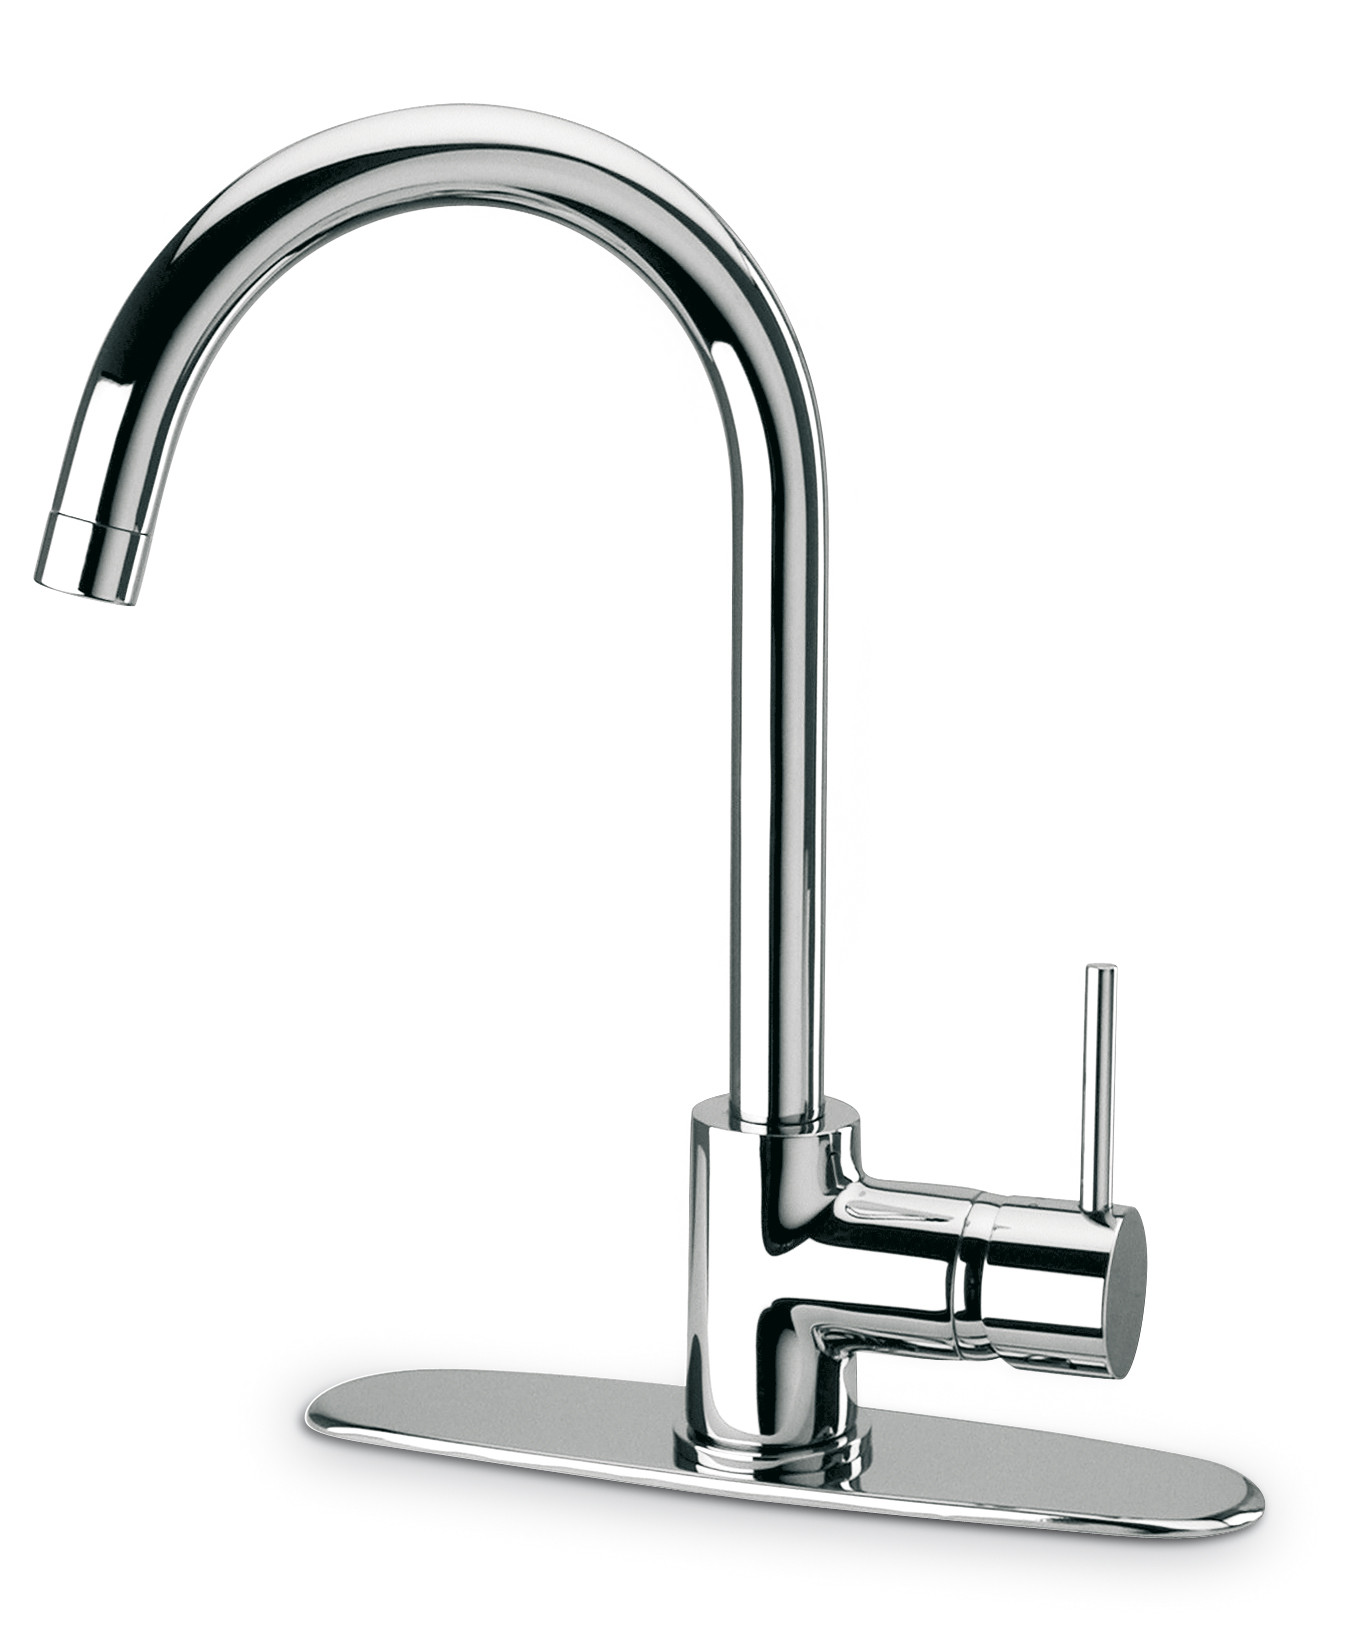 LaToscana 78CR591 Single Hole Pull Down Kitchen Faucet - Shown In Chrome